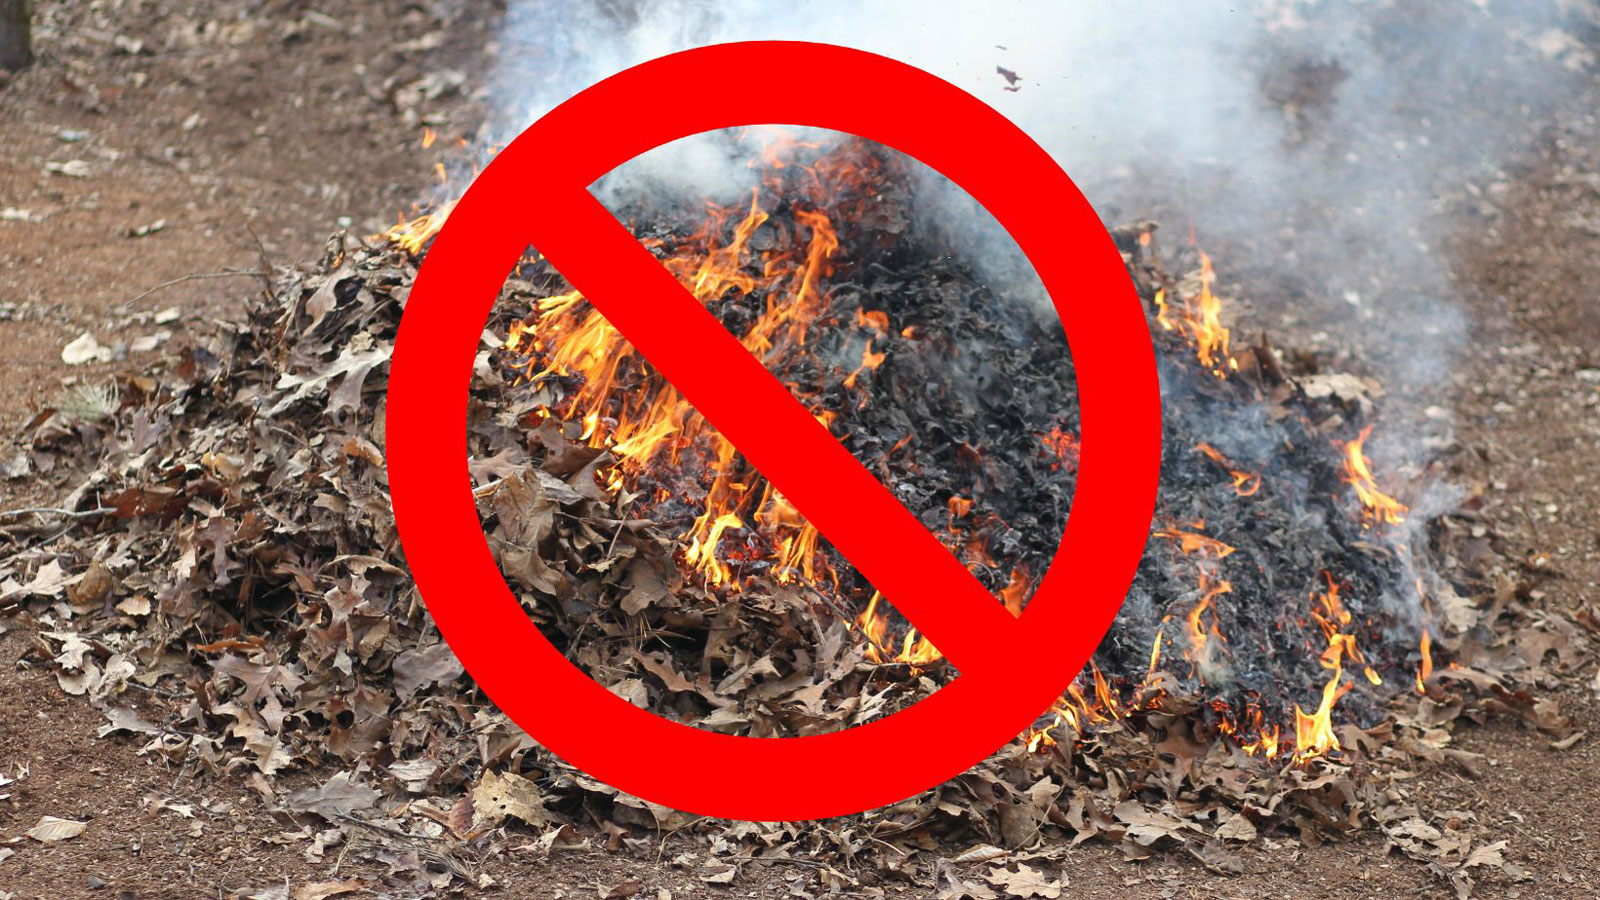 Current fire hazard designation and restrictions